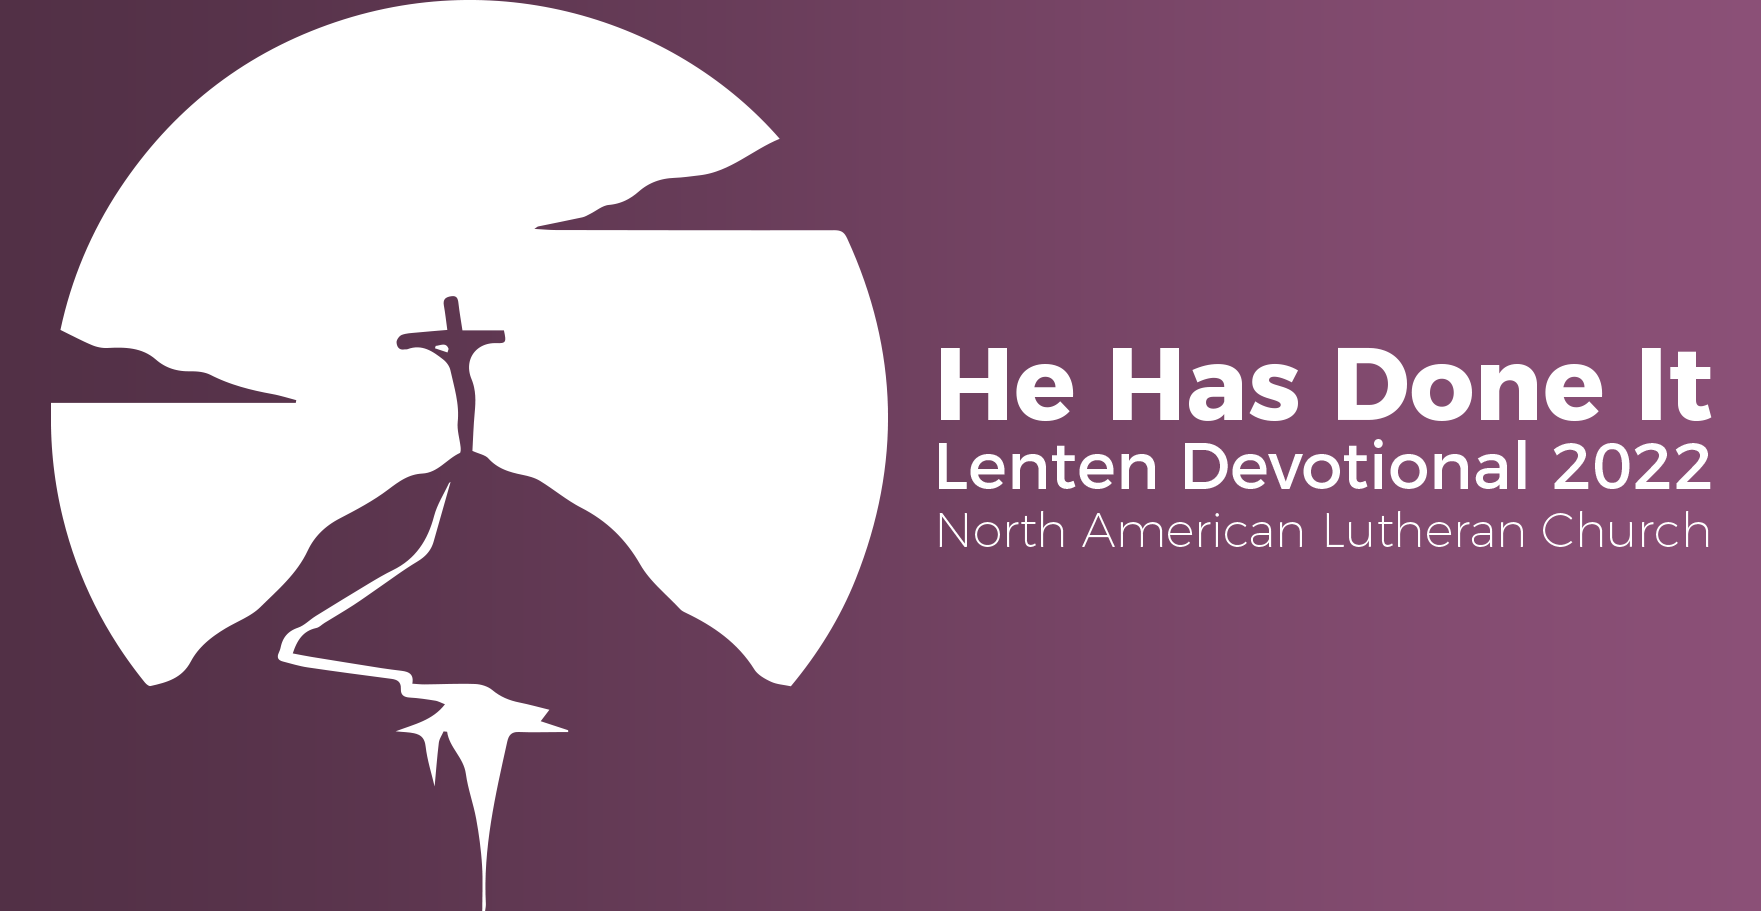 March 18, 2022 | Friday of the Week of Lent II